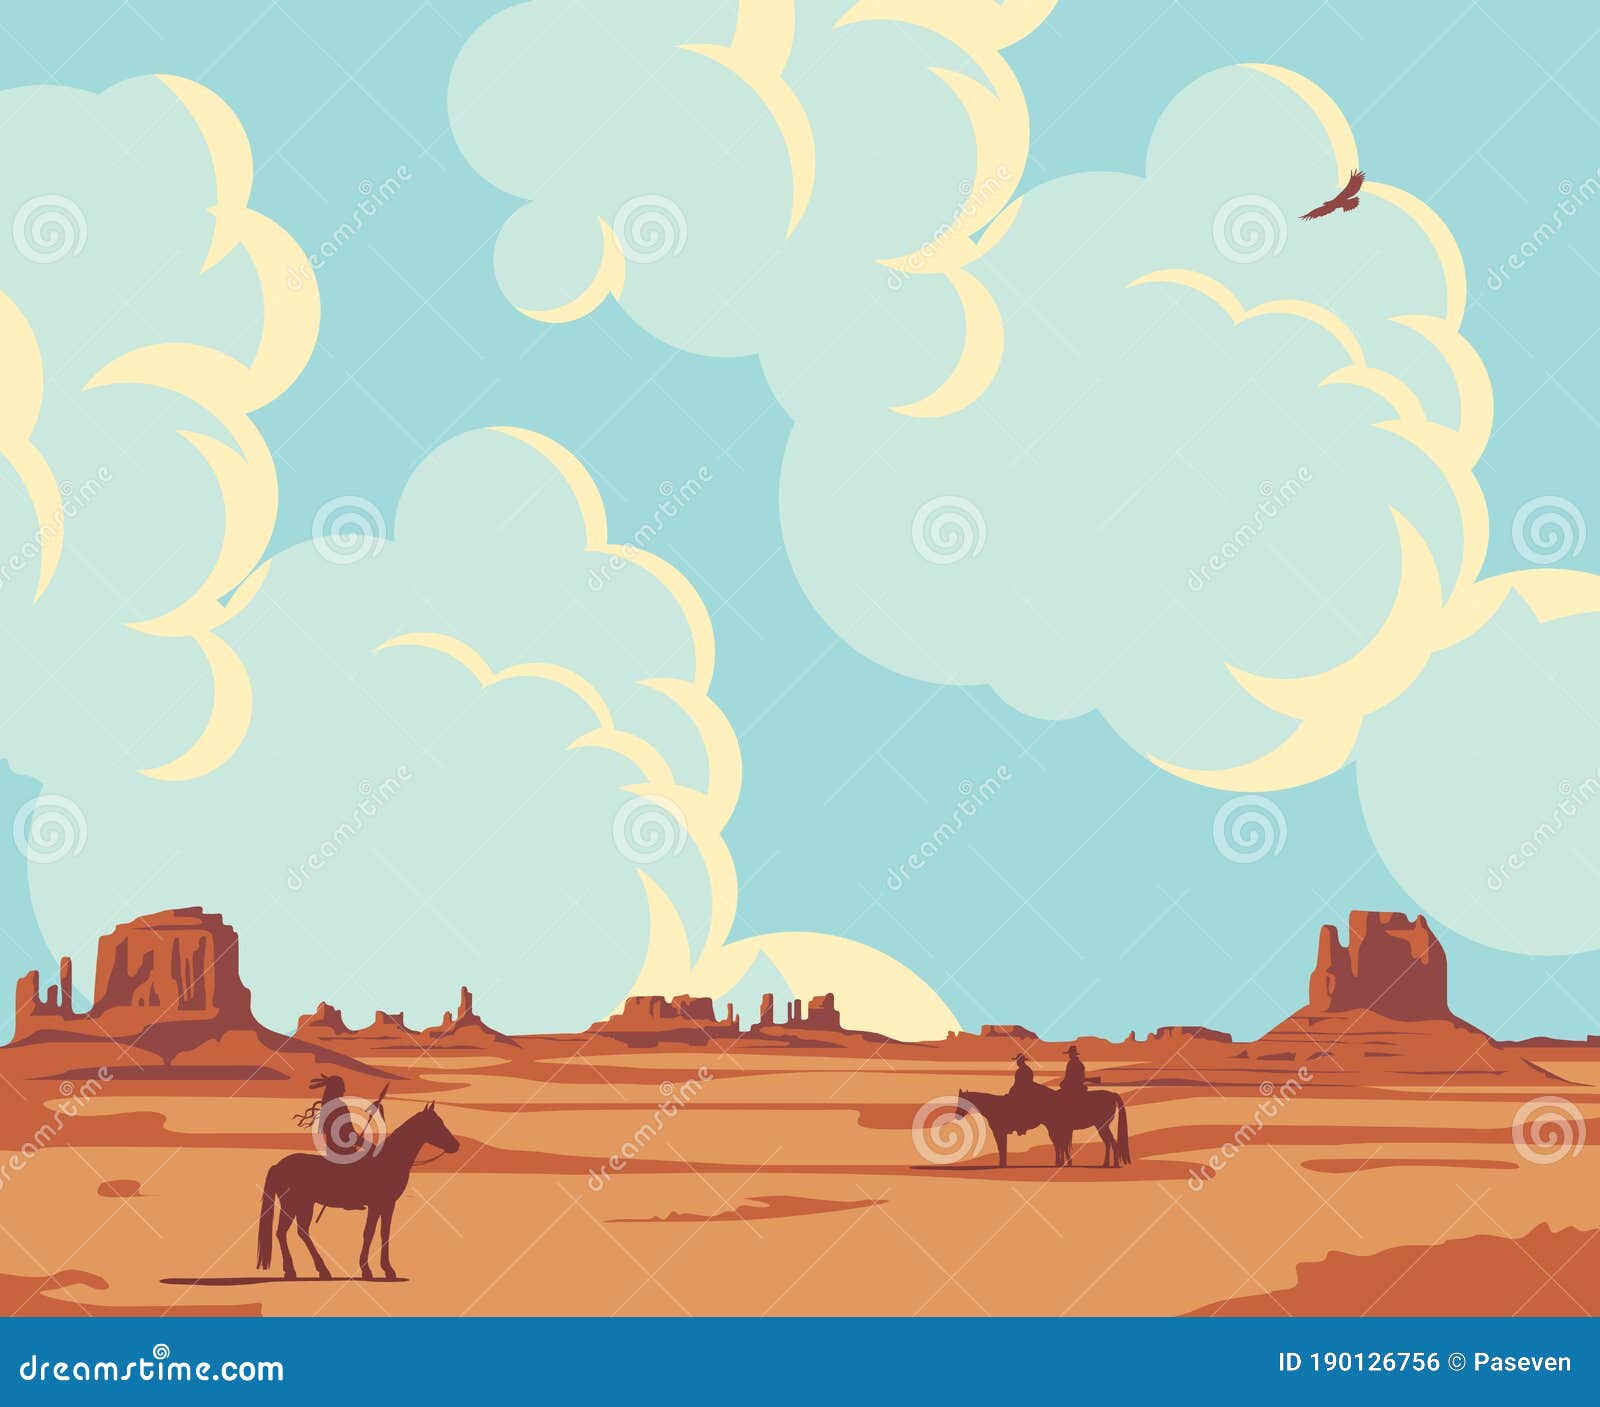 Cartoon Western Landscape with Cowboys and Indian Stock Vector -  Illustration of american, people: 190126756